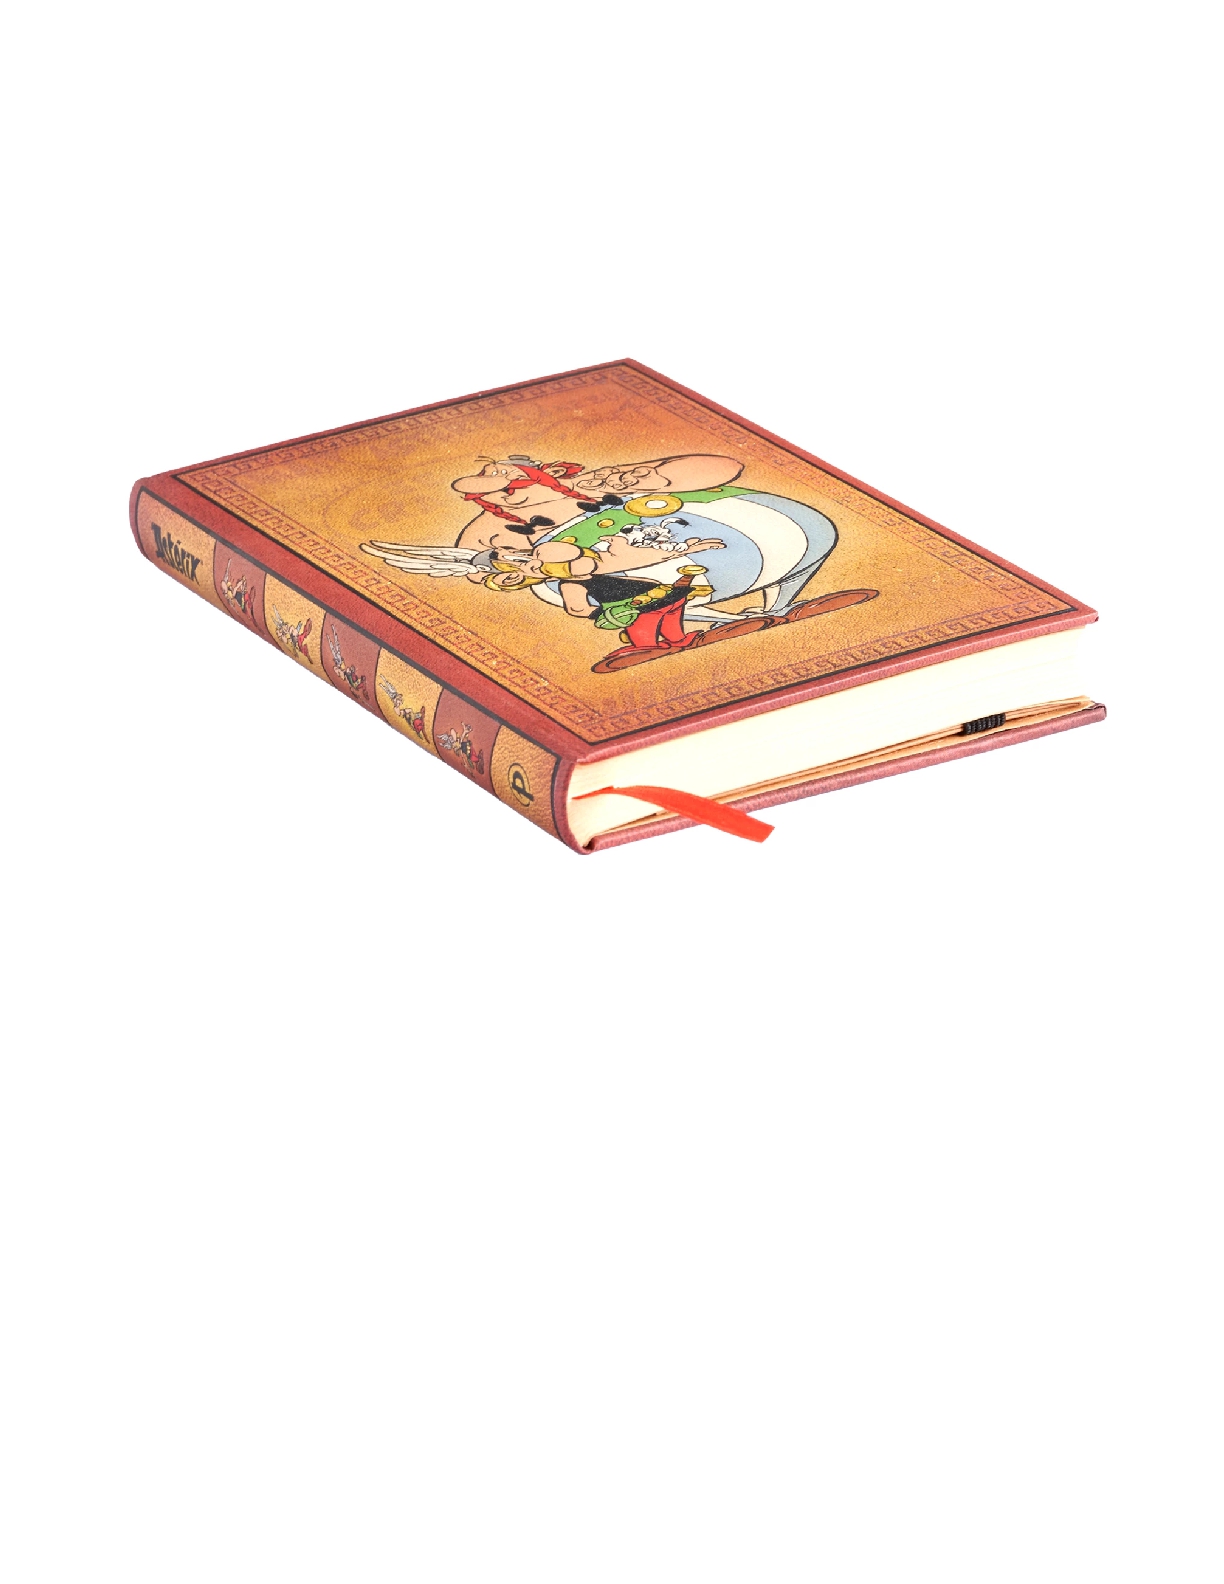 Asterix & Obelix, The Adventures of Asterix, Hardcover Journals, Mini, Lined, Elastic Band, 176 Pg, 85 GSM